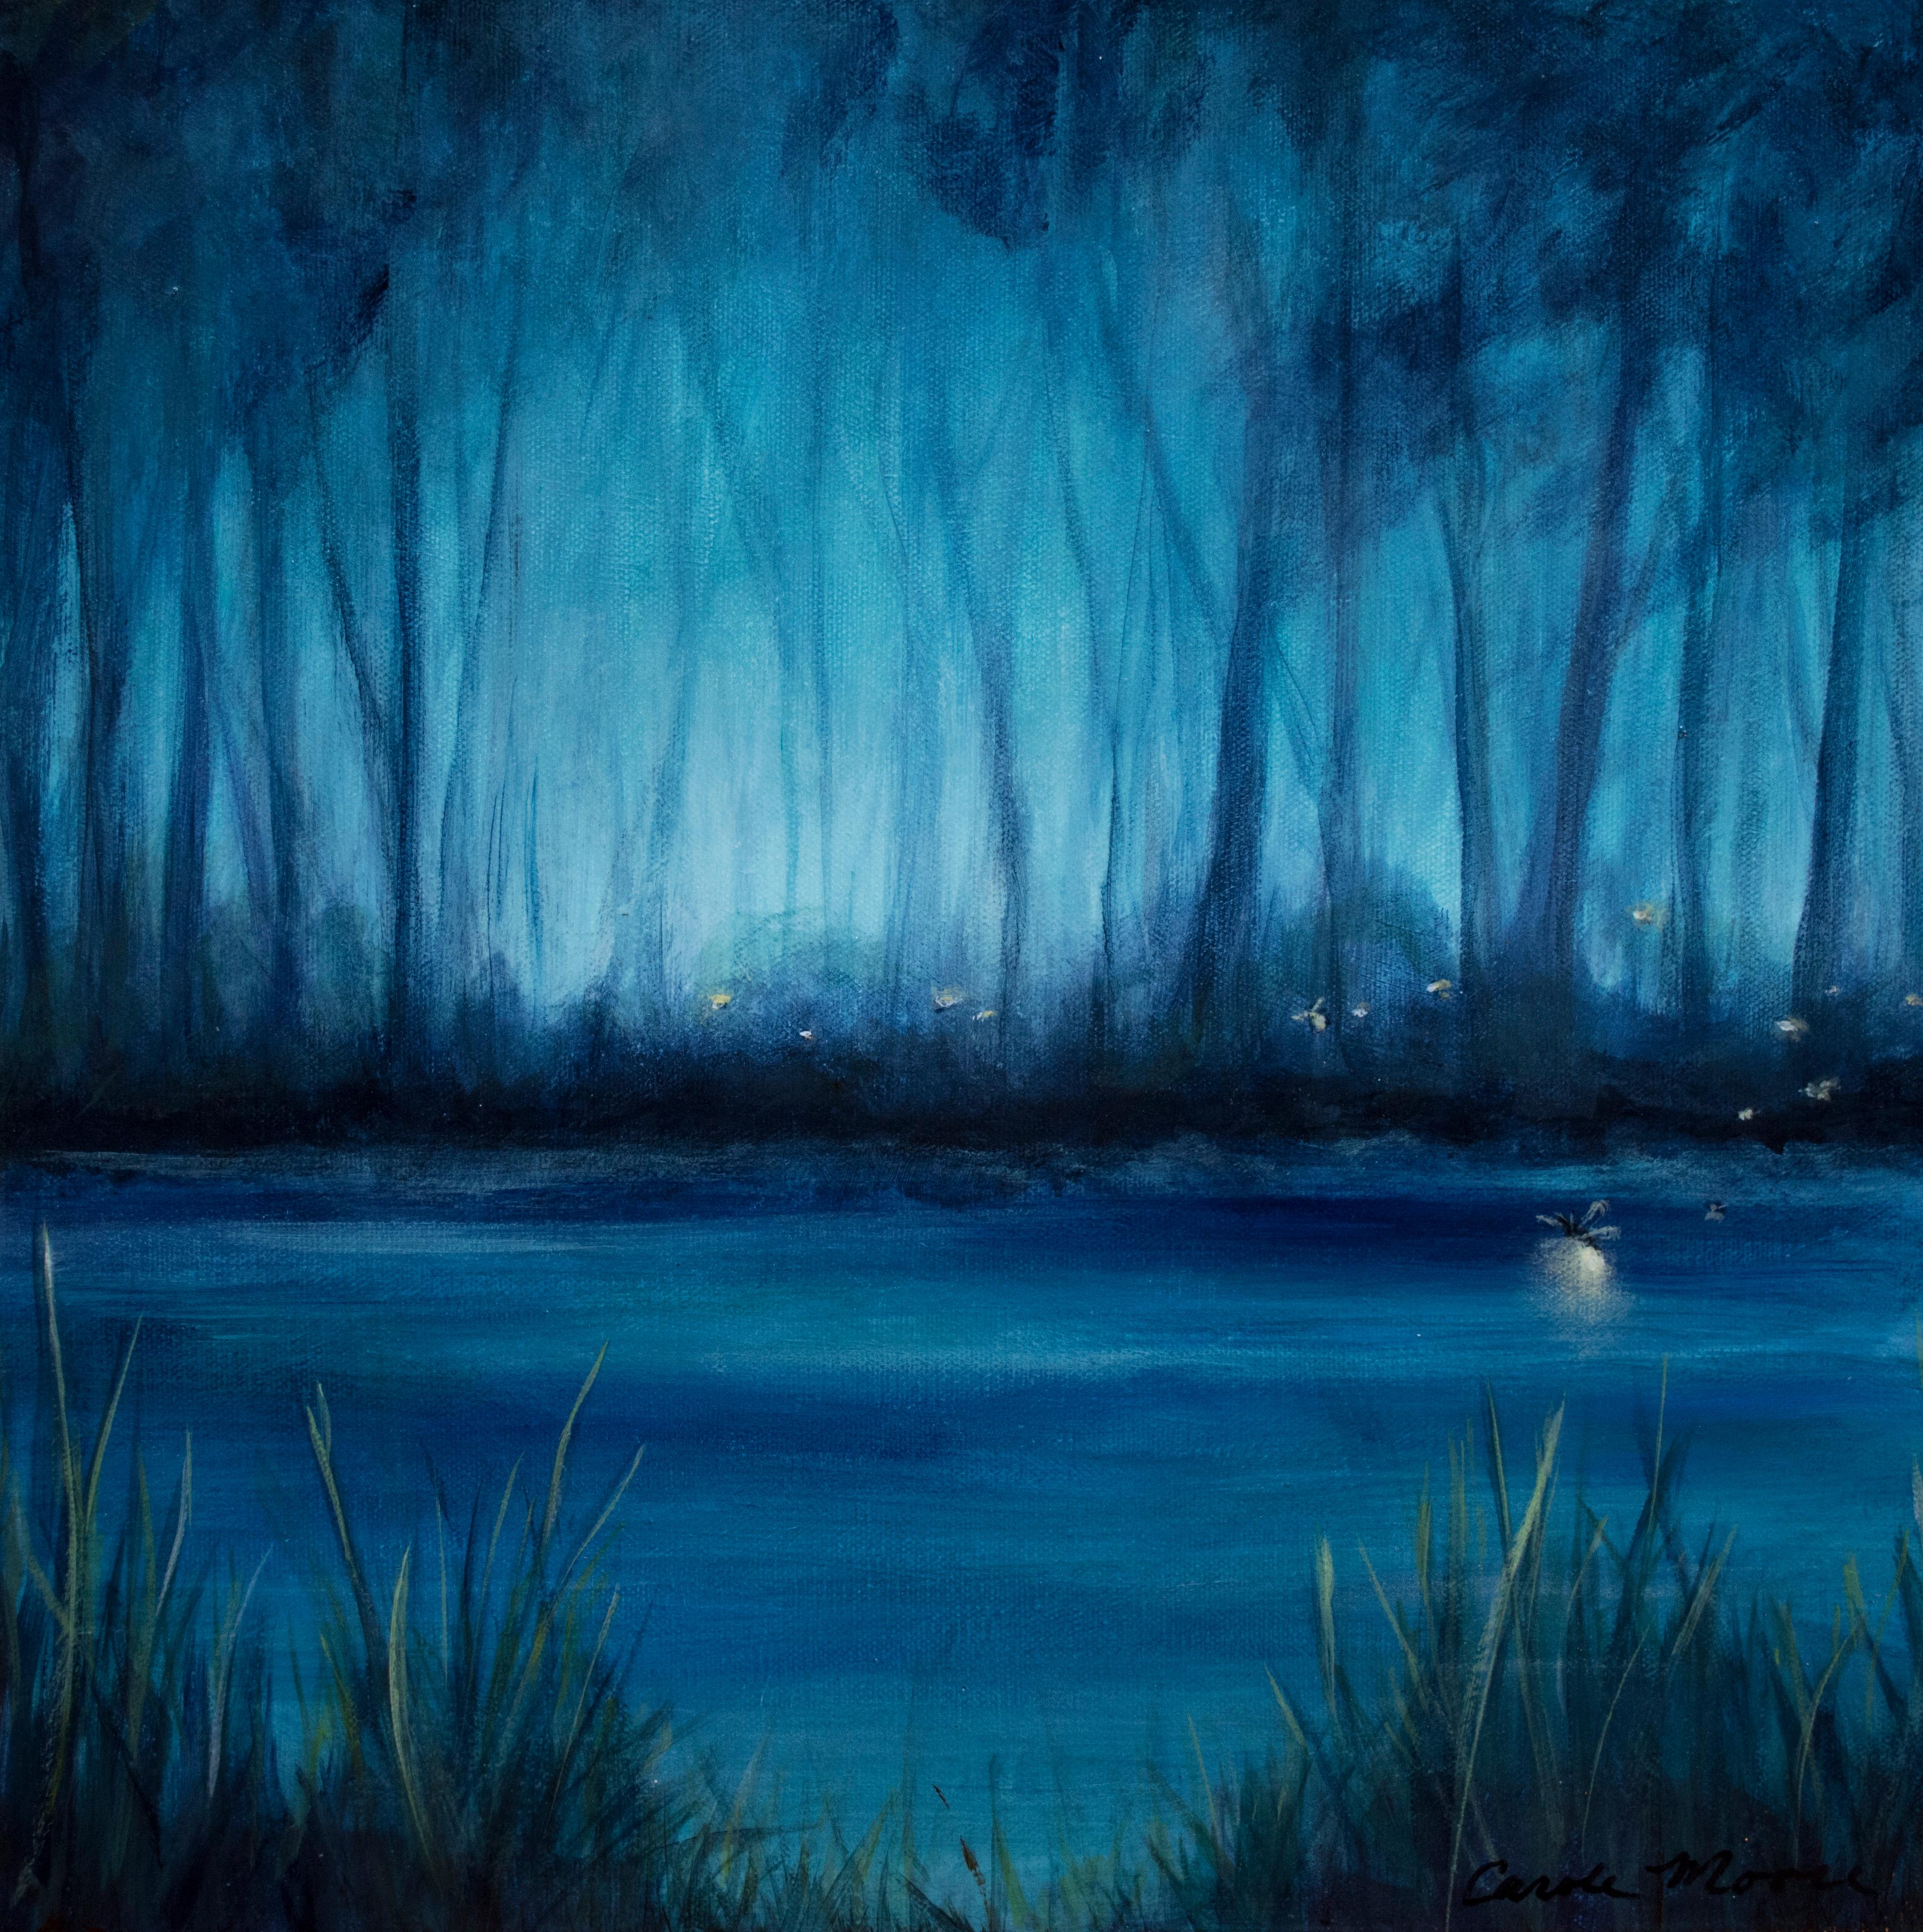 Blue Marsh I Carole Moore, Acrylic painting on stretched canvas
Finished black edges
Varnished and Ready to hang
One-of-a-kind
Signed on front
2018
16 in. h x 16 in. w x 1.5 in. d
1 lbs. 6 oz.  

Artist Comments 
The fireflies of my East Coast youth